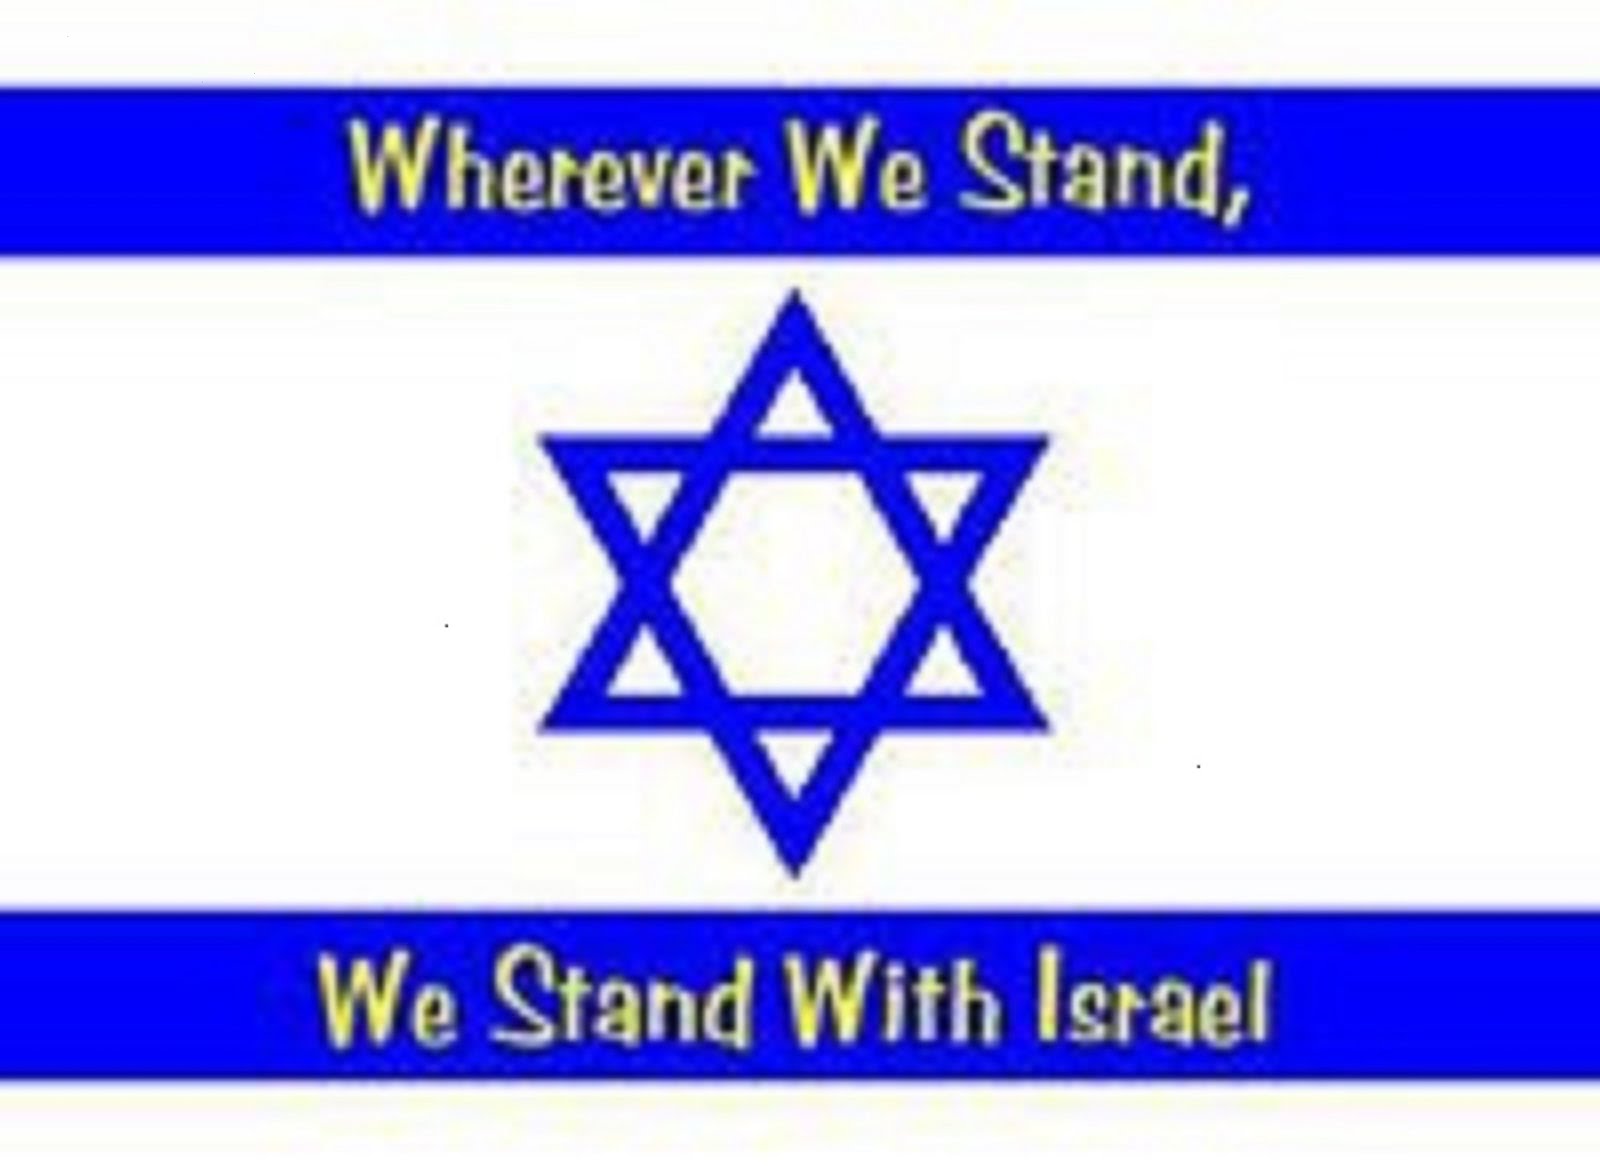 WHERE EVER WE STAND WE STAND WITH ISRAEL